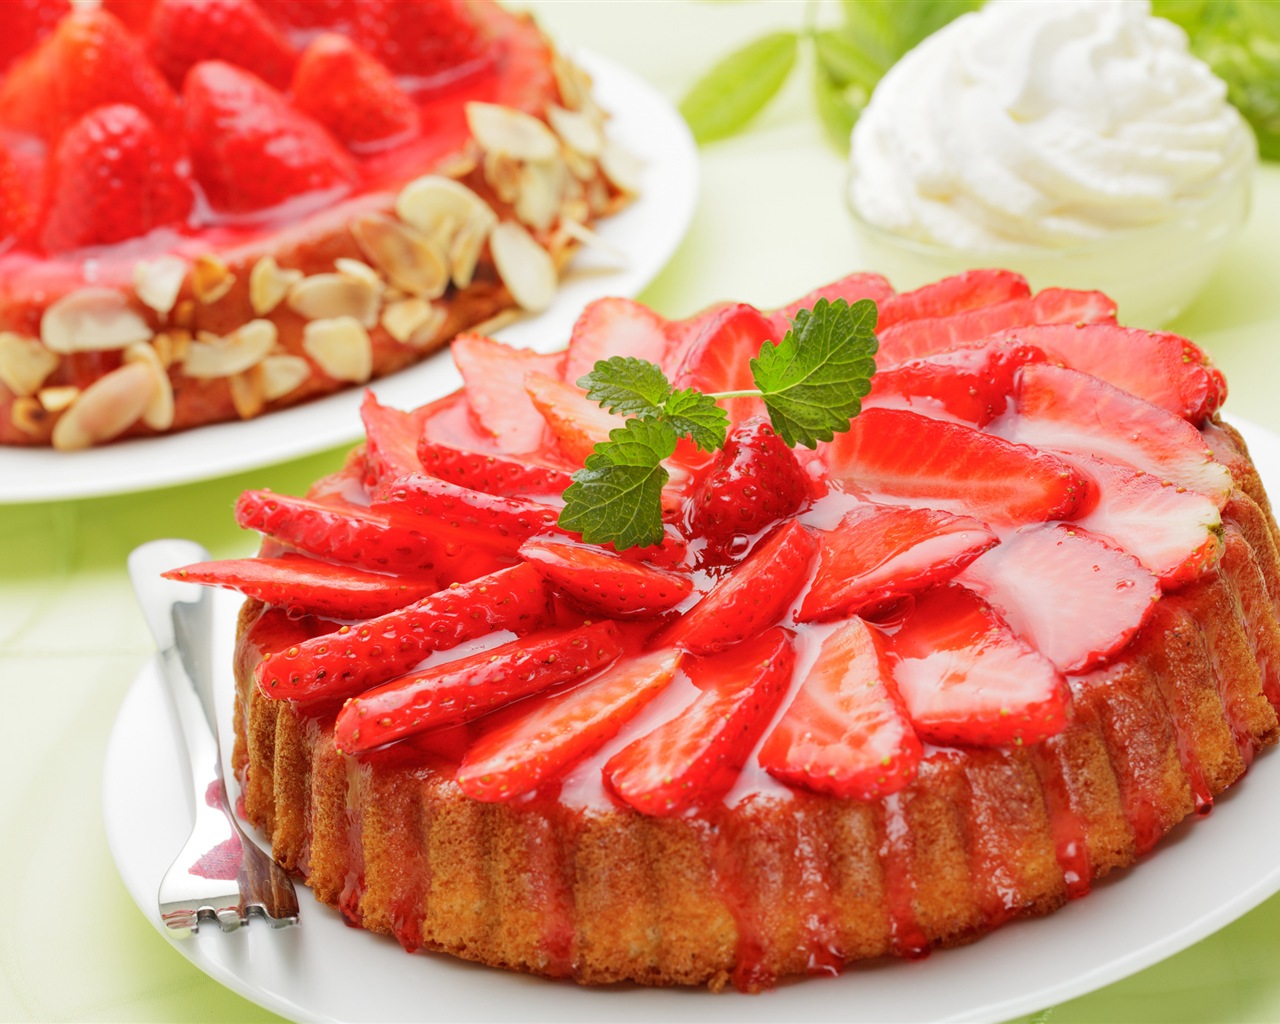 Delicious strawberry cake HD wallpapers #12 - 1280x1024